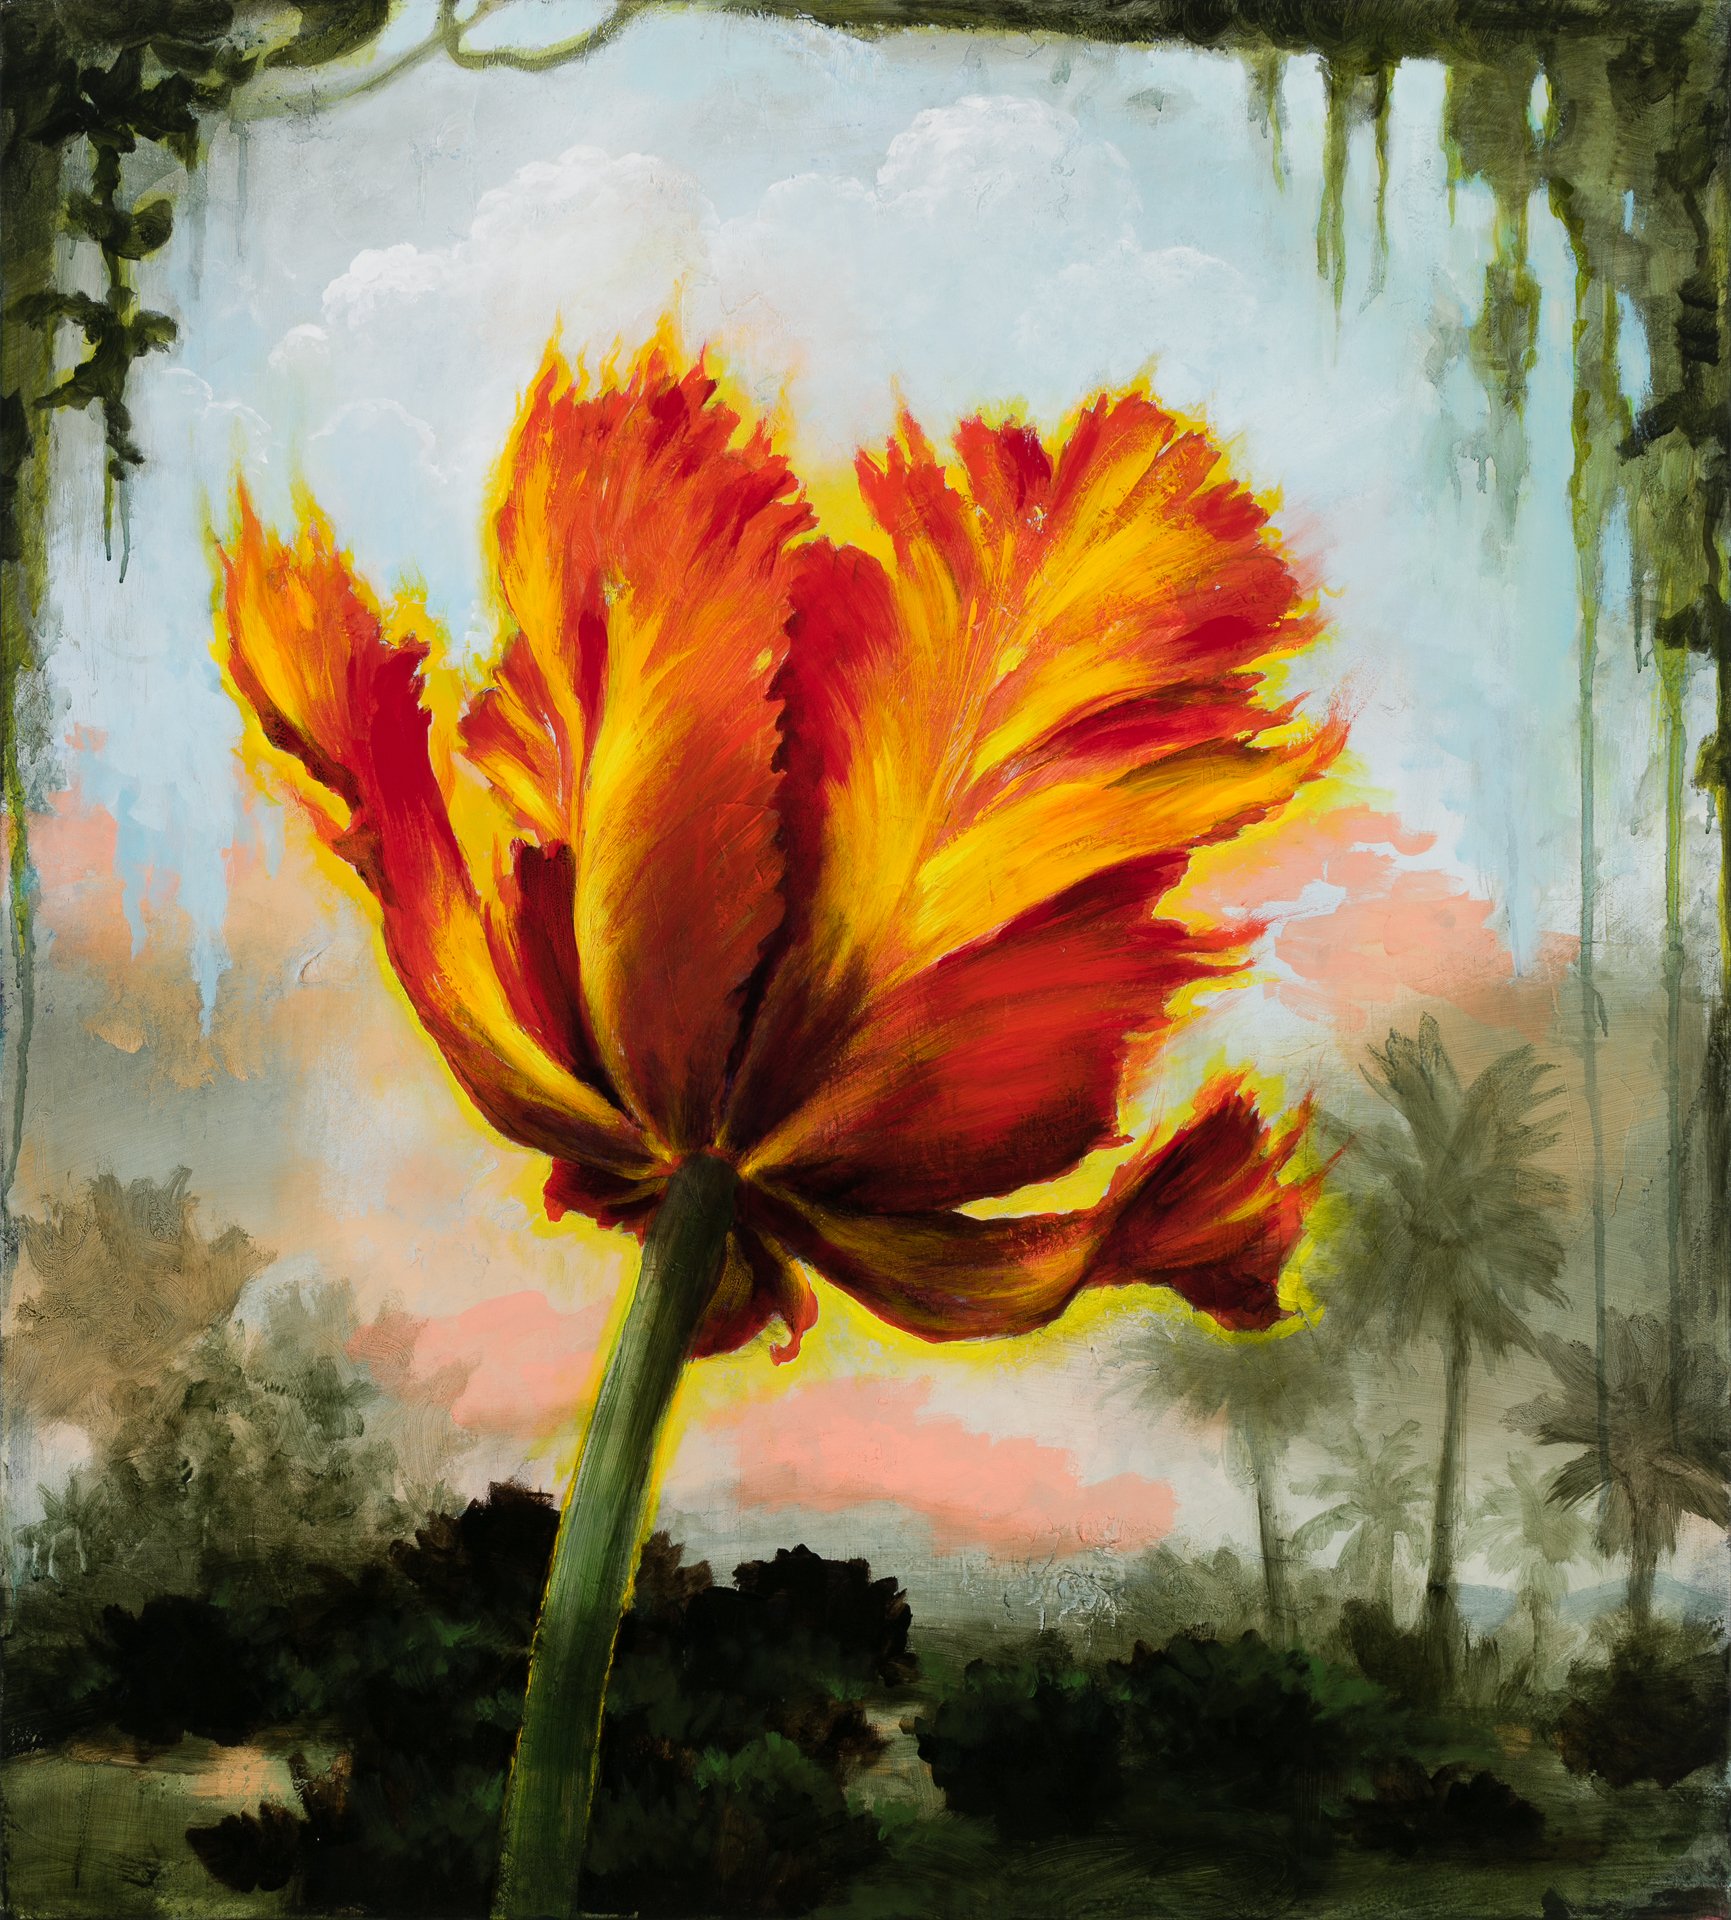 "Portrait of a Tulip Attempting the Become a Flame", 40"x36"